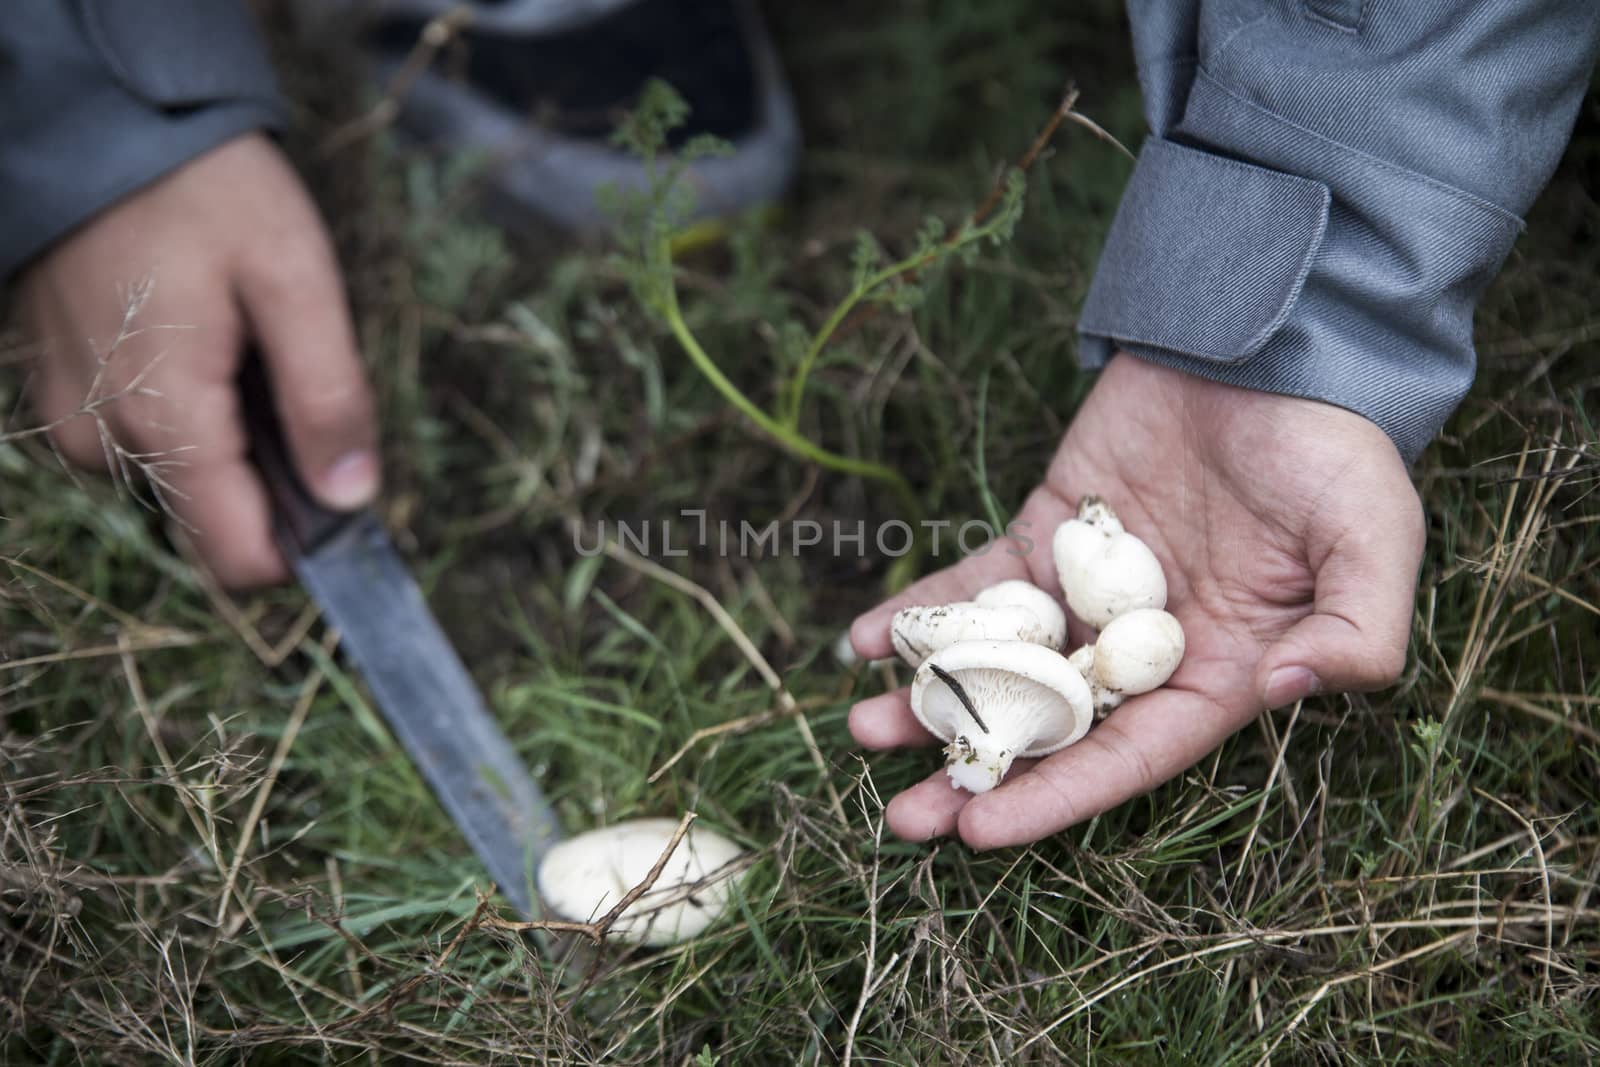 Man collecting mushrooms in field